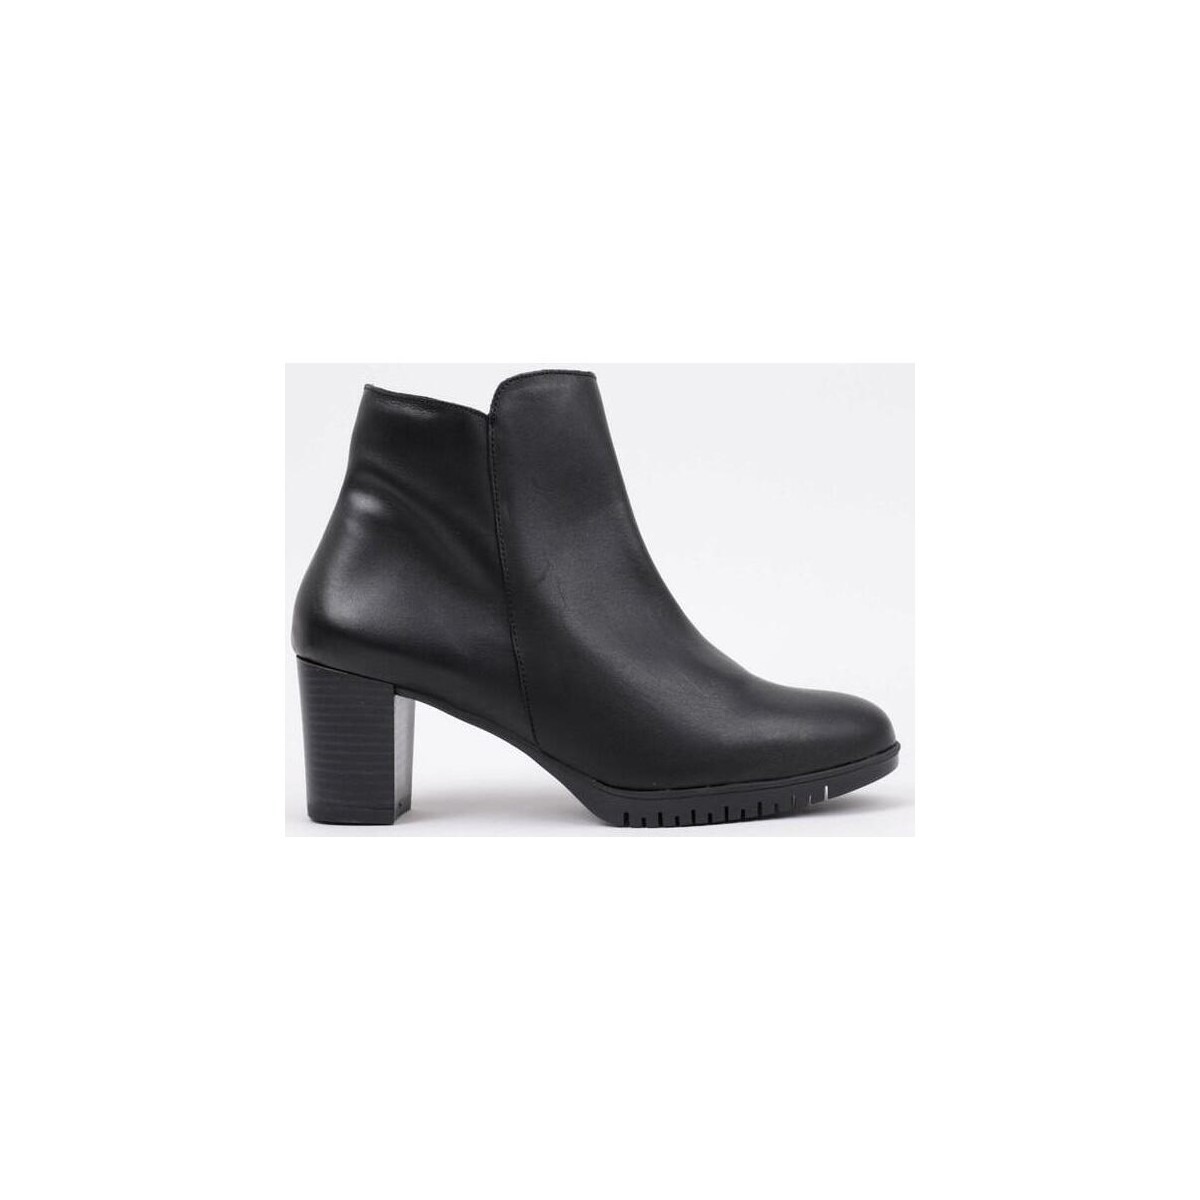 Sandra Fontan - Black Ankle Boots for Women at Spartoo GOOFASH